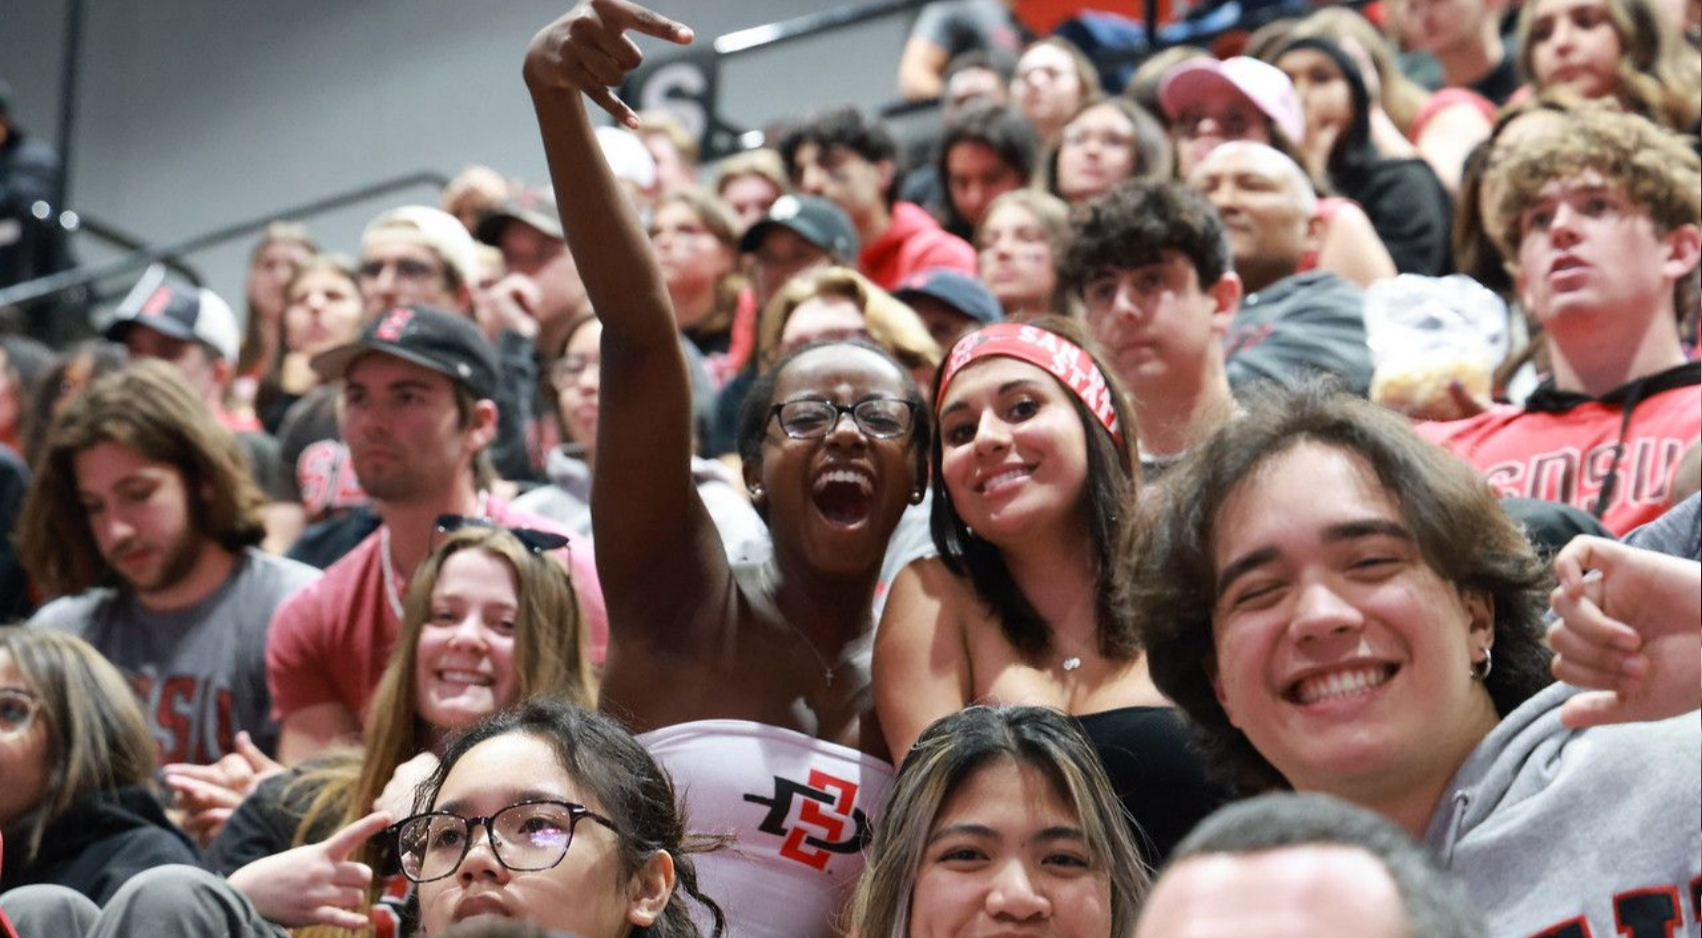 Students cheer on the Aztecs men's basketball team during an NCAA championship game watch party at Viejas Arena. (SDSU)